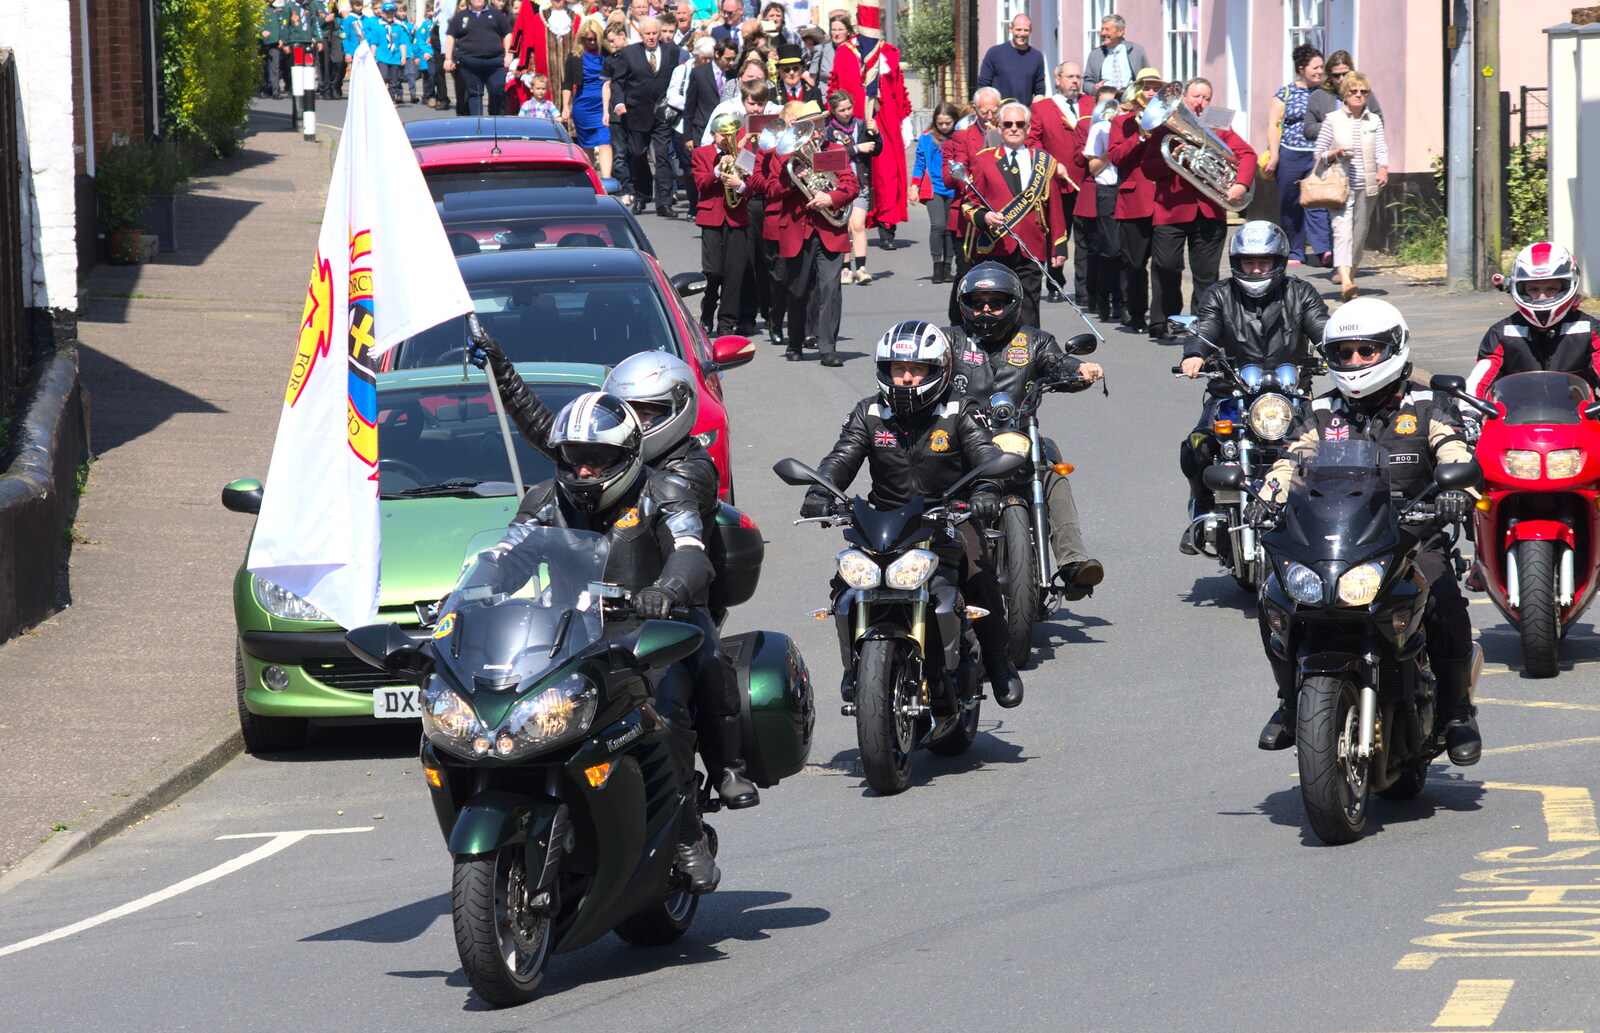 The Christian bikers in action from A Trip to the Office and the Mayor-Making Parade, Eye, Suffolk - 4th June 2016